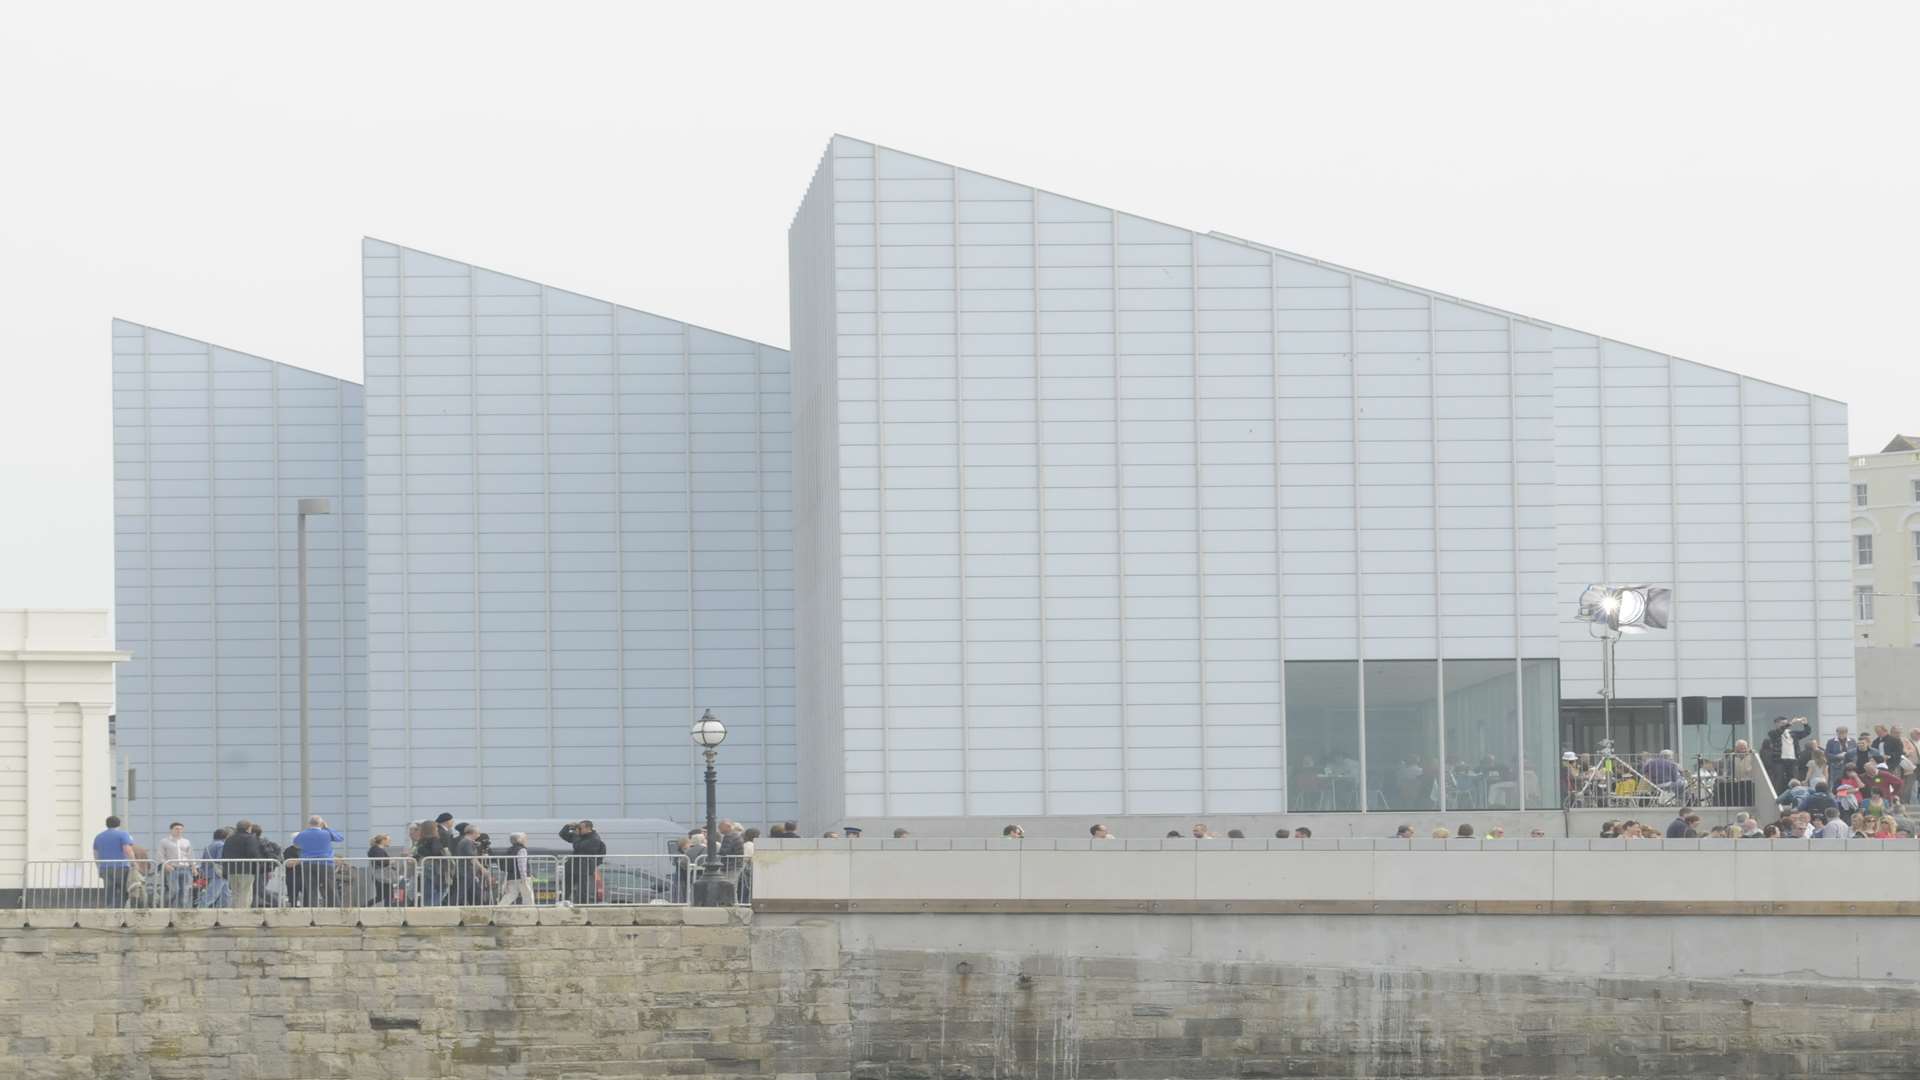 The Turner Contemporary in Margate